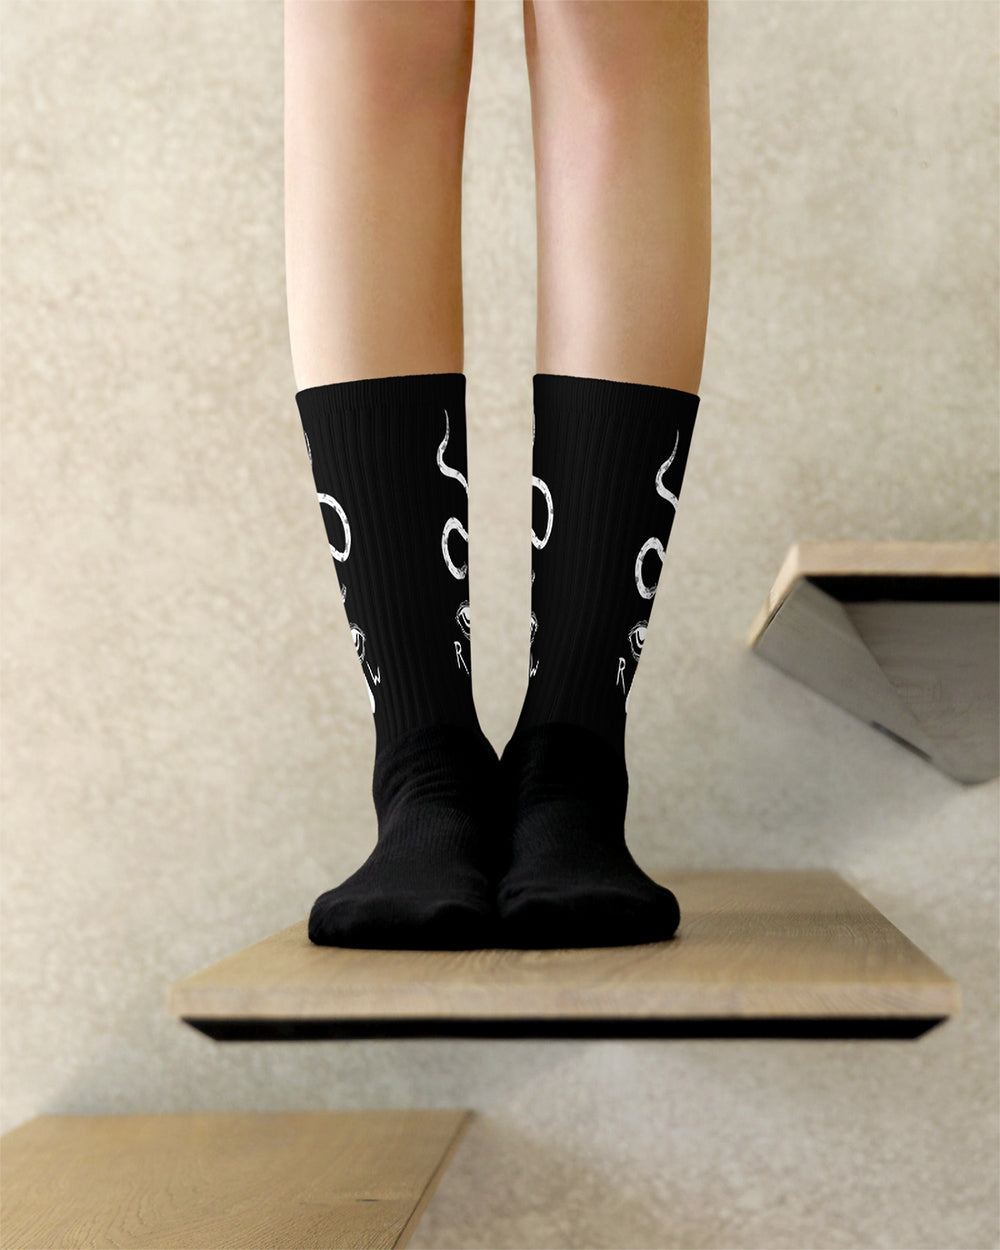 Serpent Sorcery Socks - Witchy Goth Fashion, Dark Academia Grunge Aesthetic Accessories - On-Demand Sustainable Product